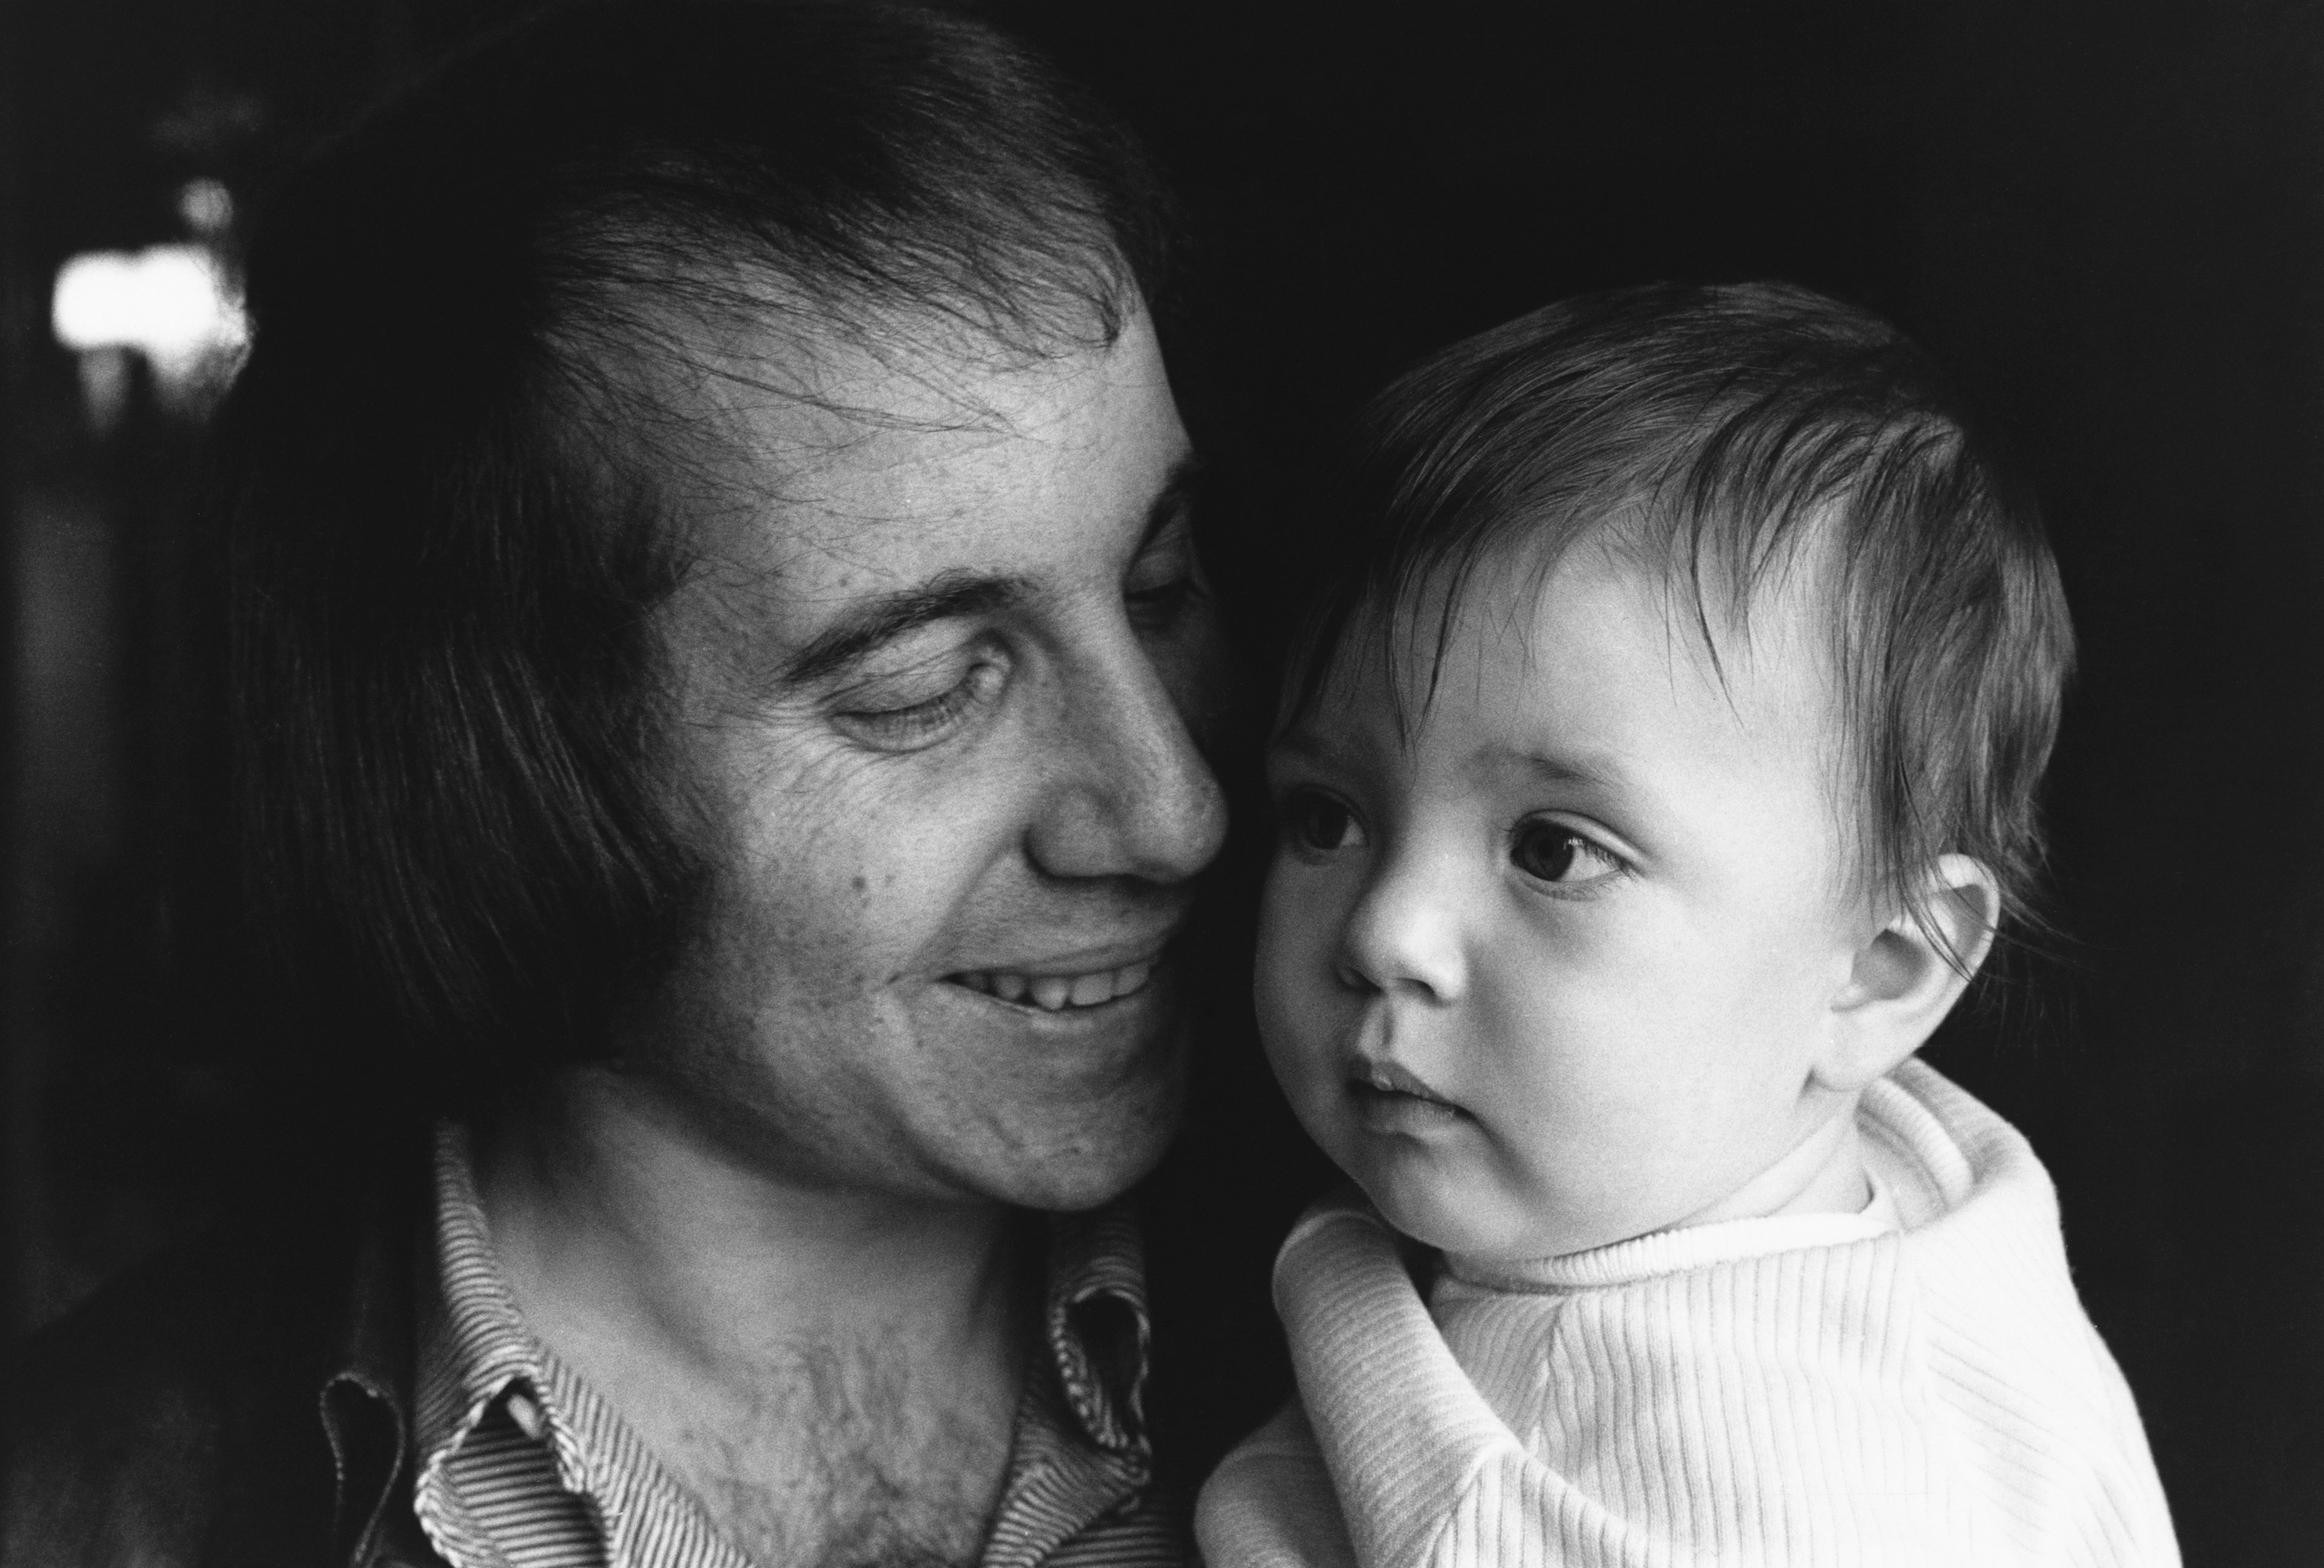 Paul Simon and his son, Harper Simon, when he was a baby on June 7, 1973. | Source: Getty Images